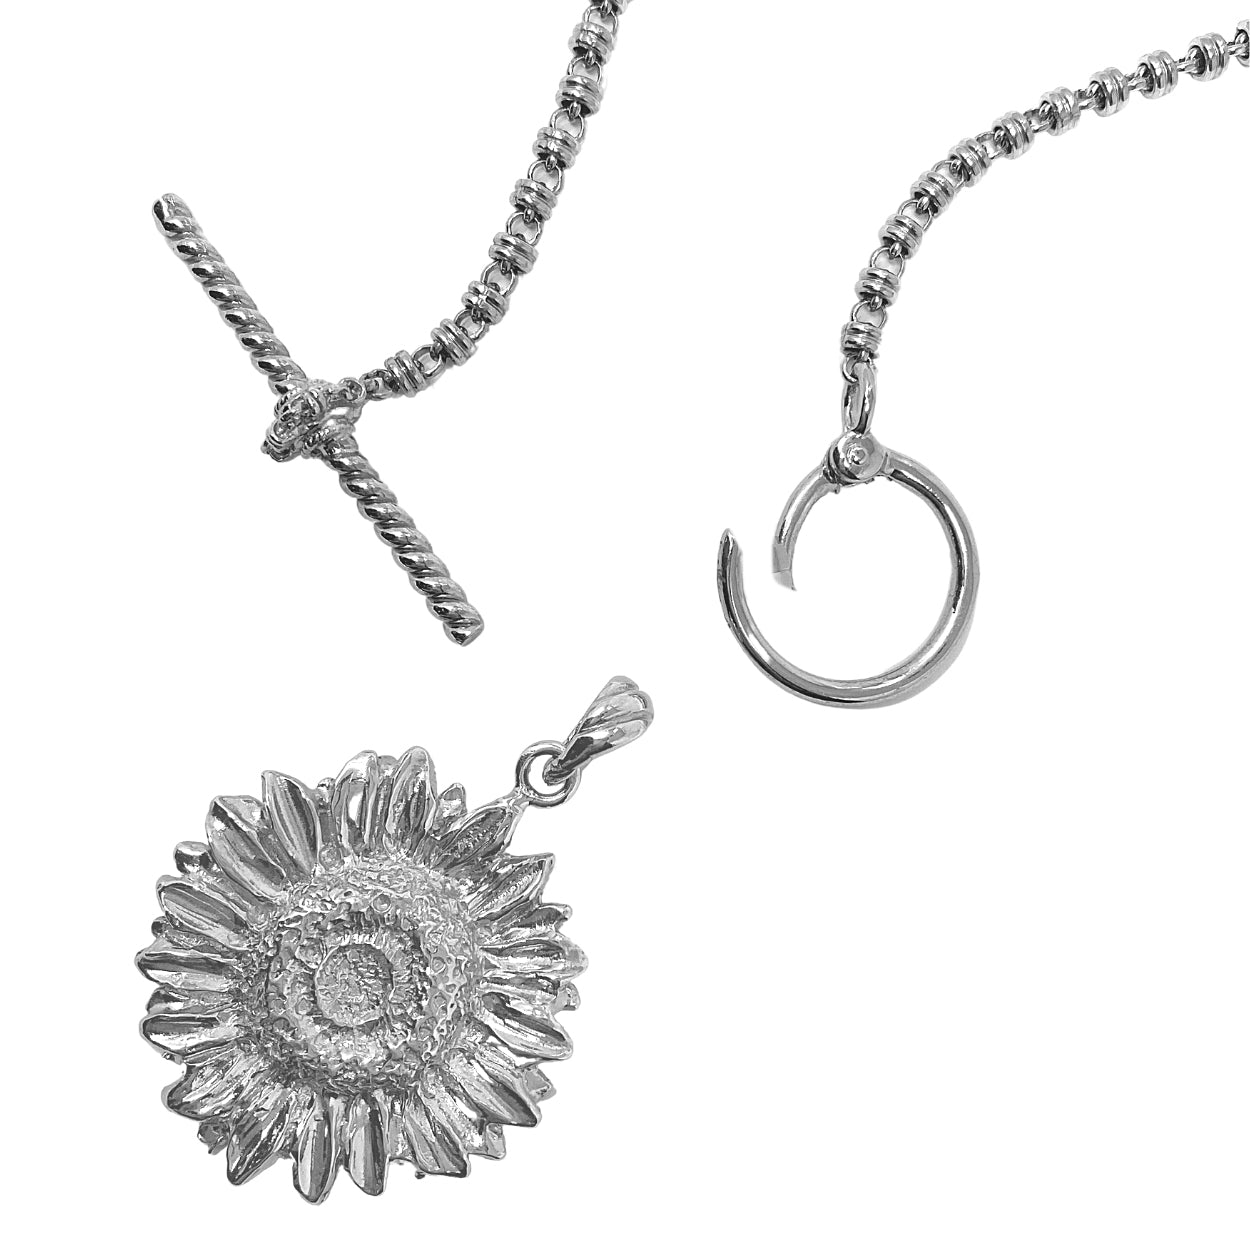 A closeup of the open silver toggle clasp with a silver sunflower pendant detached from a silver necklace - the silver chain is from the Links 3mm collection from DelBrenna Italian Jewelry designers and artisans. Hand-crafted in Tuscany.